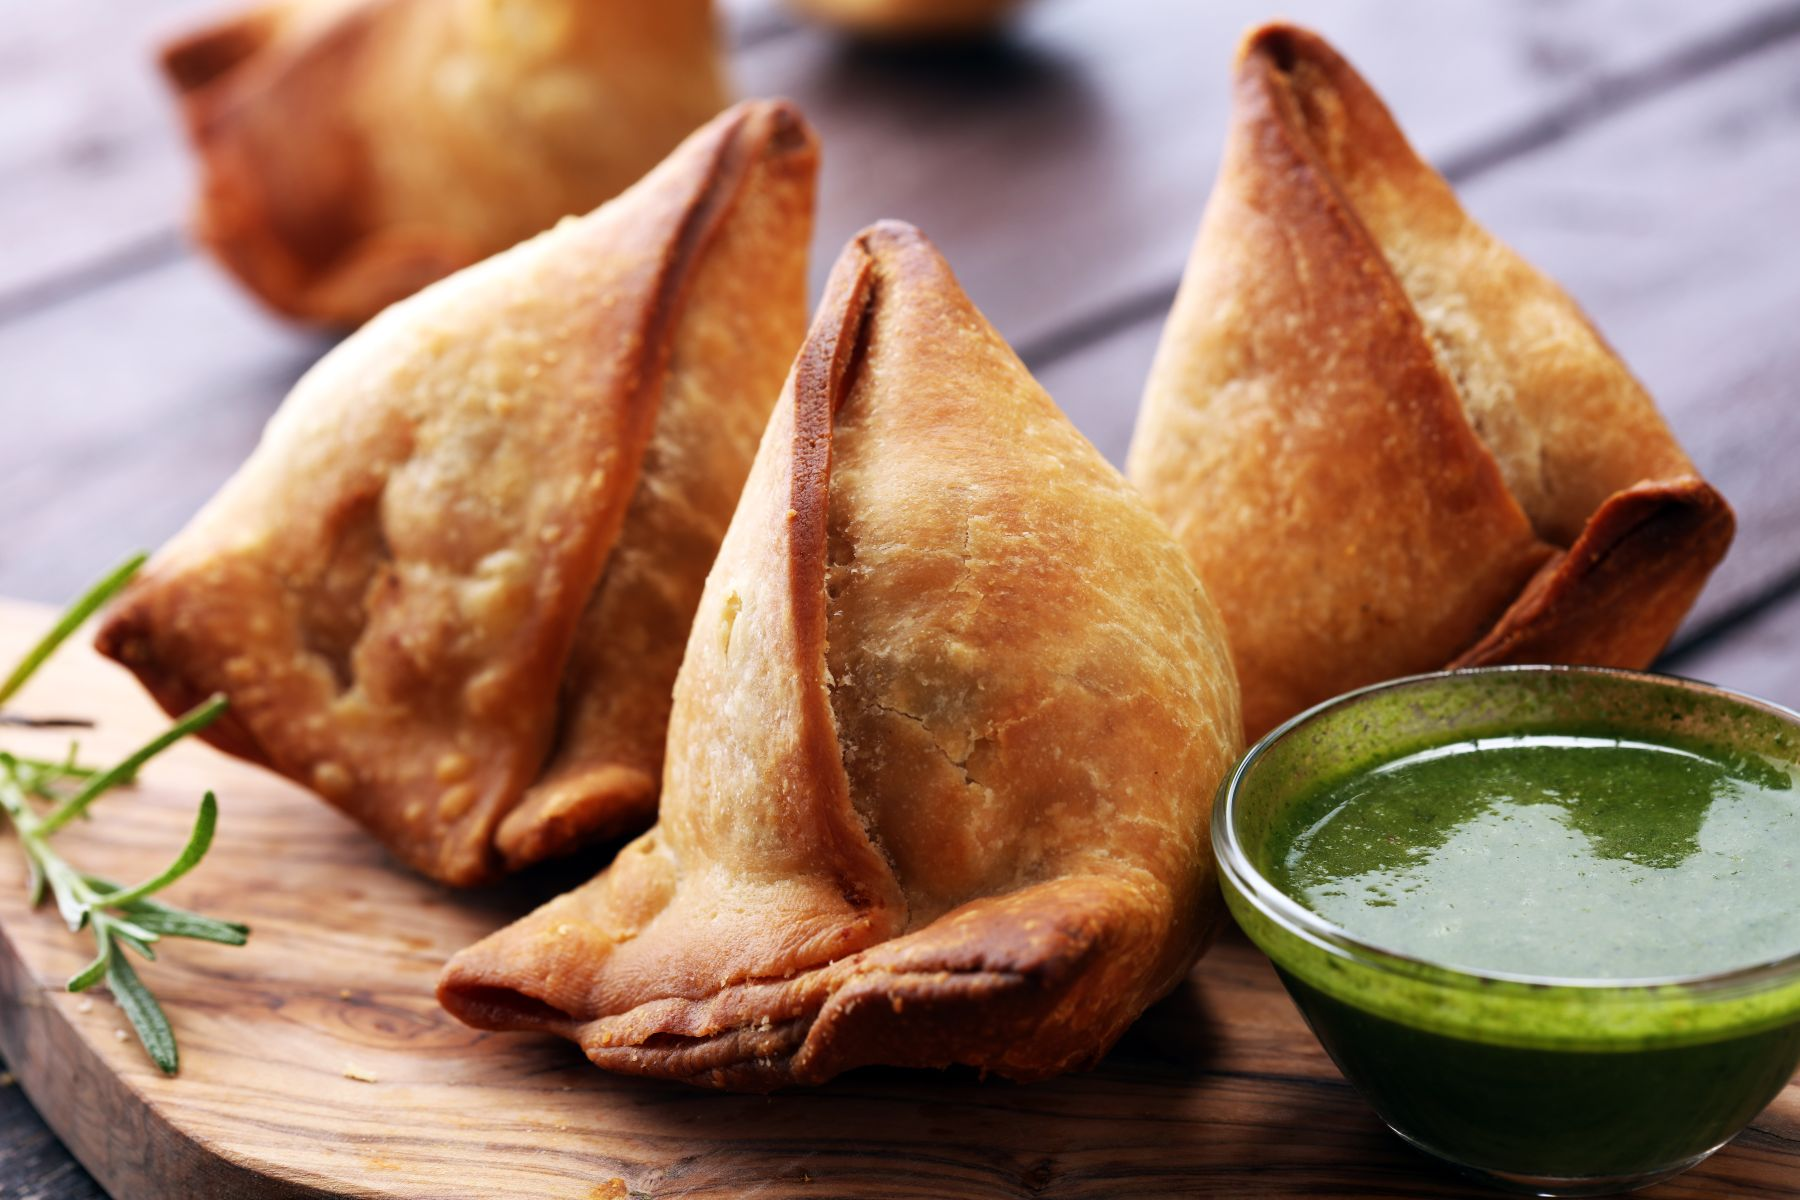 Golden Indian Veg Samosa – Crispy, flavorful vegetarian snack with aromatic spices.